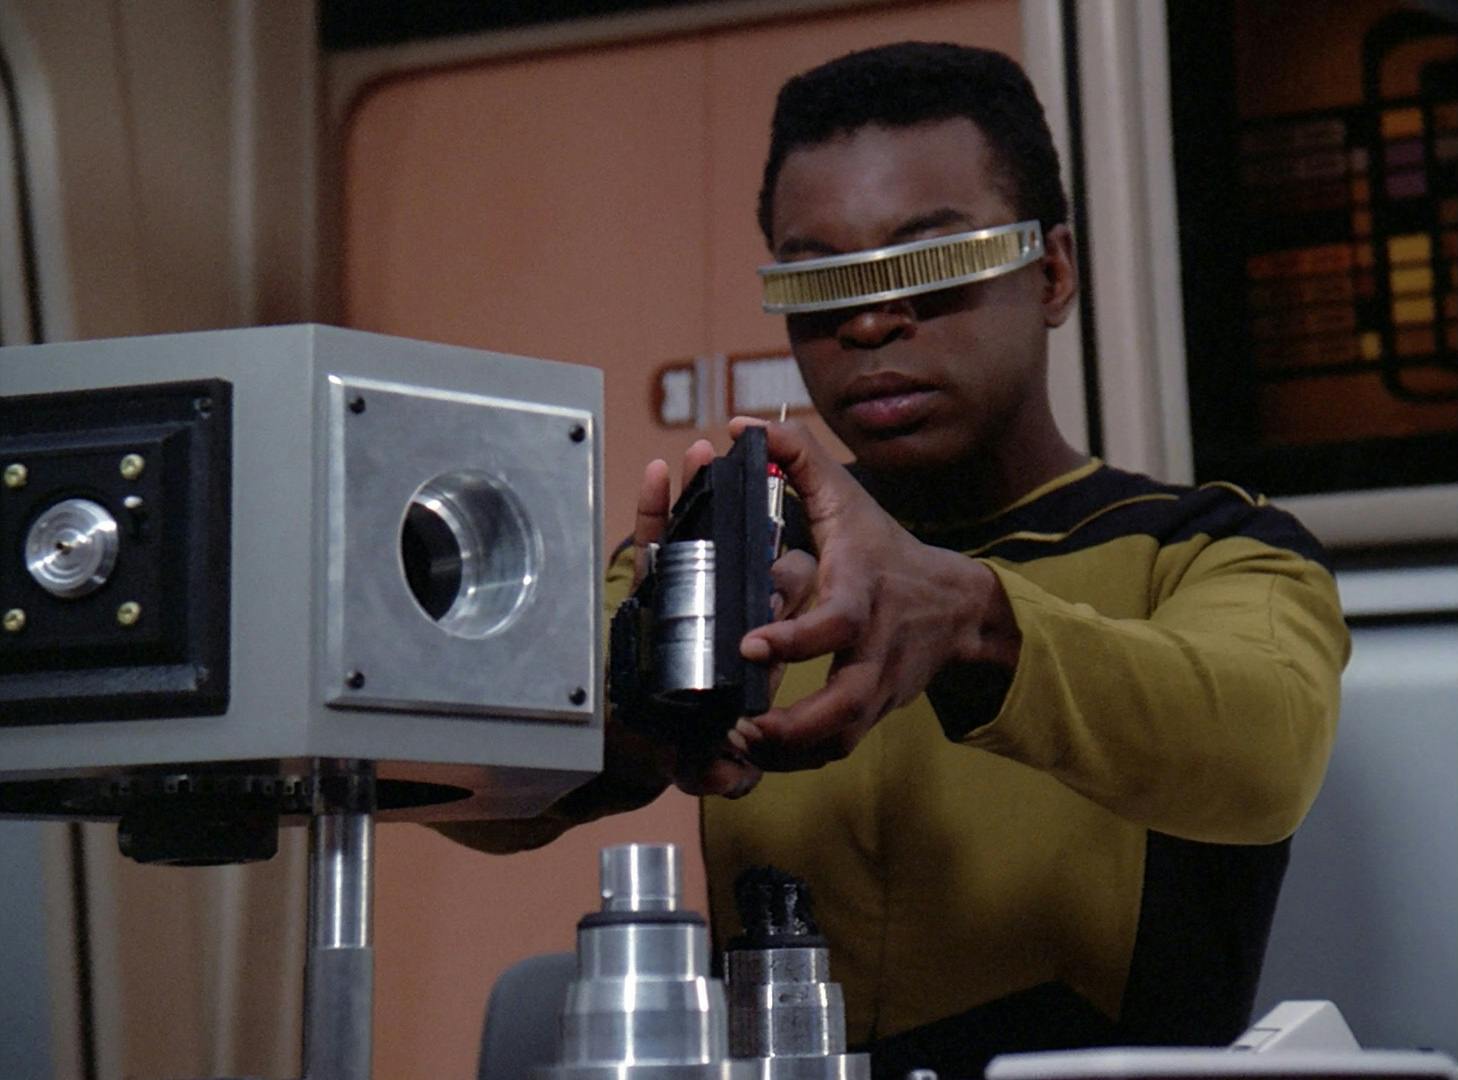 In Engineering, Geordi La Forge inspects the damage to Thadiun Okona's guidance system in 'The Outrageous Okona'